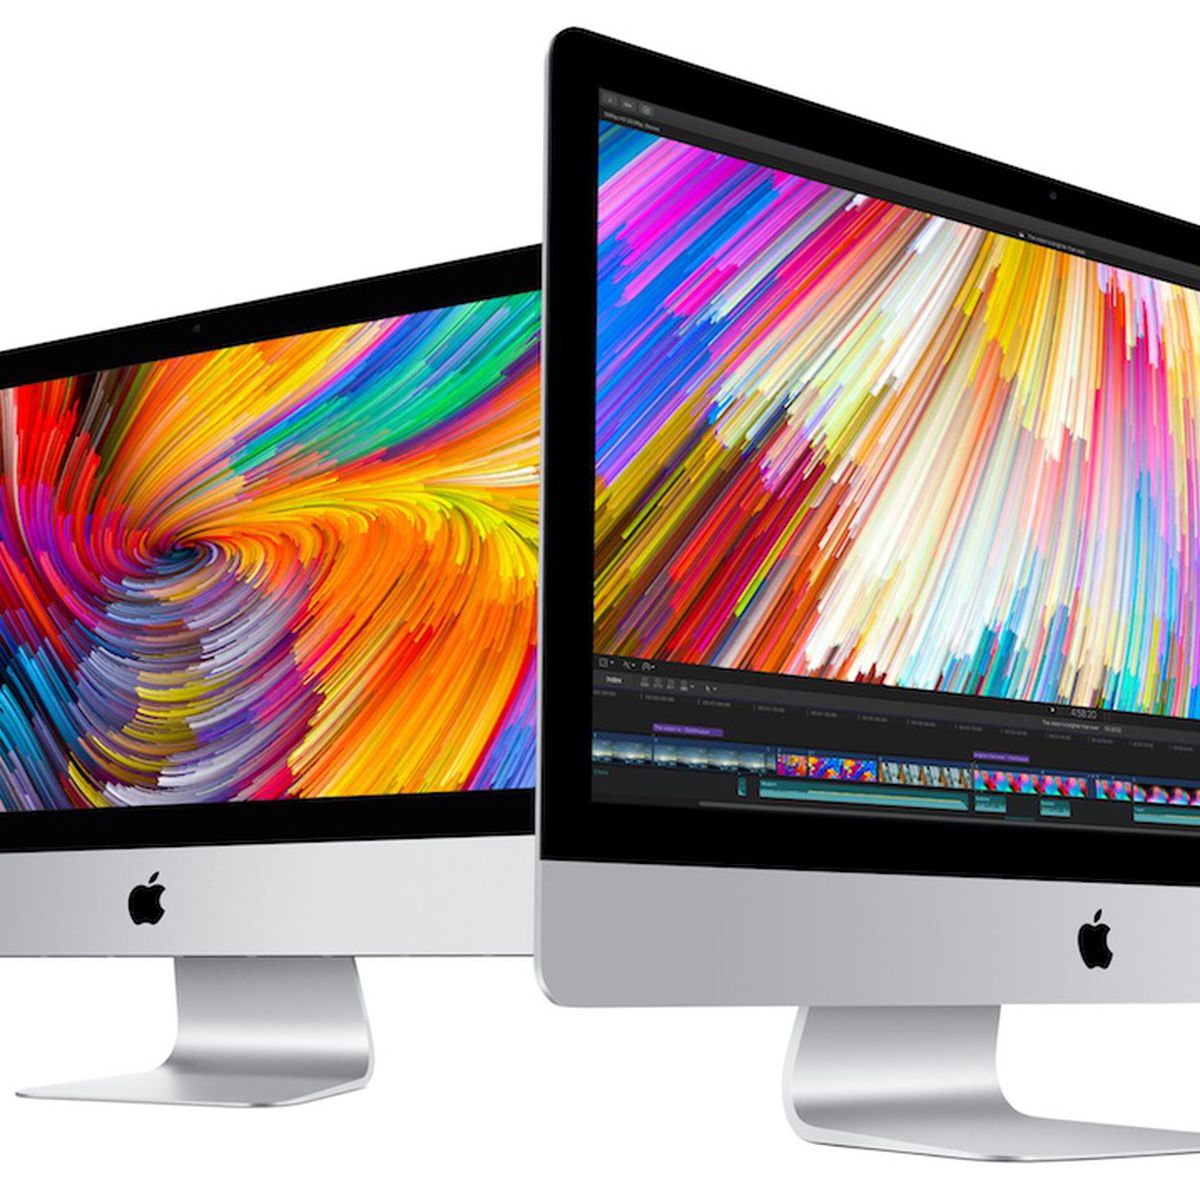 tongue Explicitly Soar Apple to Mark Several iMac Models as Obsolete Later This Month - MacRumors